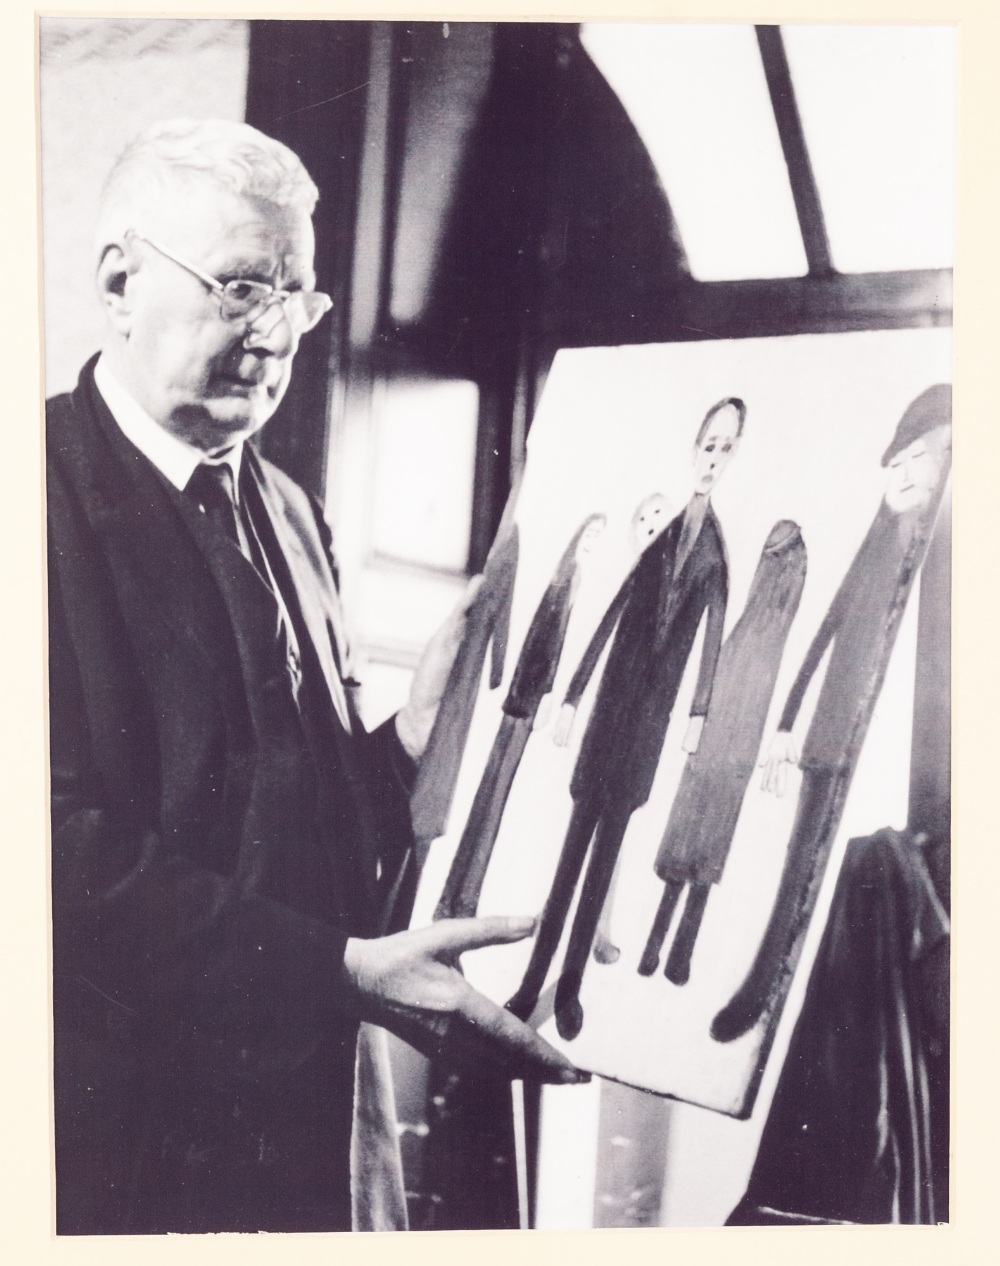 L.S. LOWRY BY MAURICE ROWE TEN BLACK AND WHITE PHOTOGRAPHS FEATURING LOWRY AND ONE OF SALFORD MARKET - Image 2 of 10